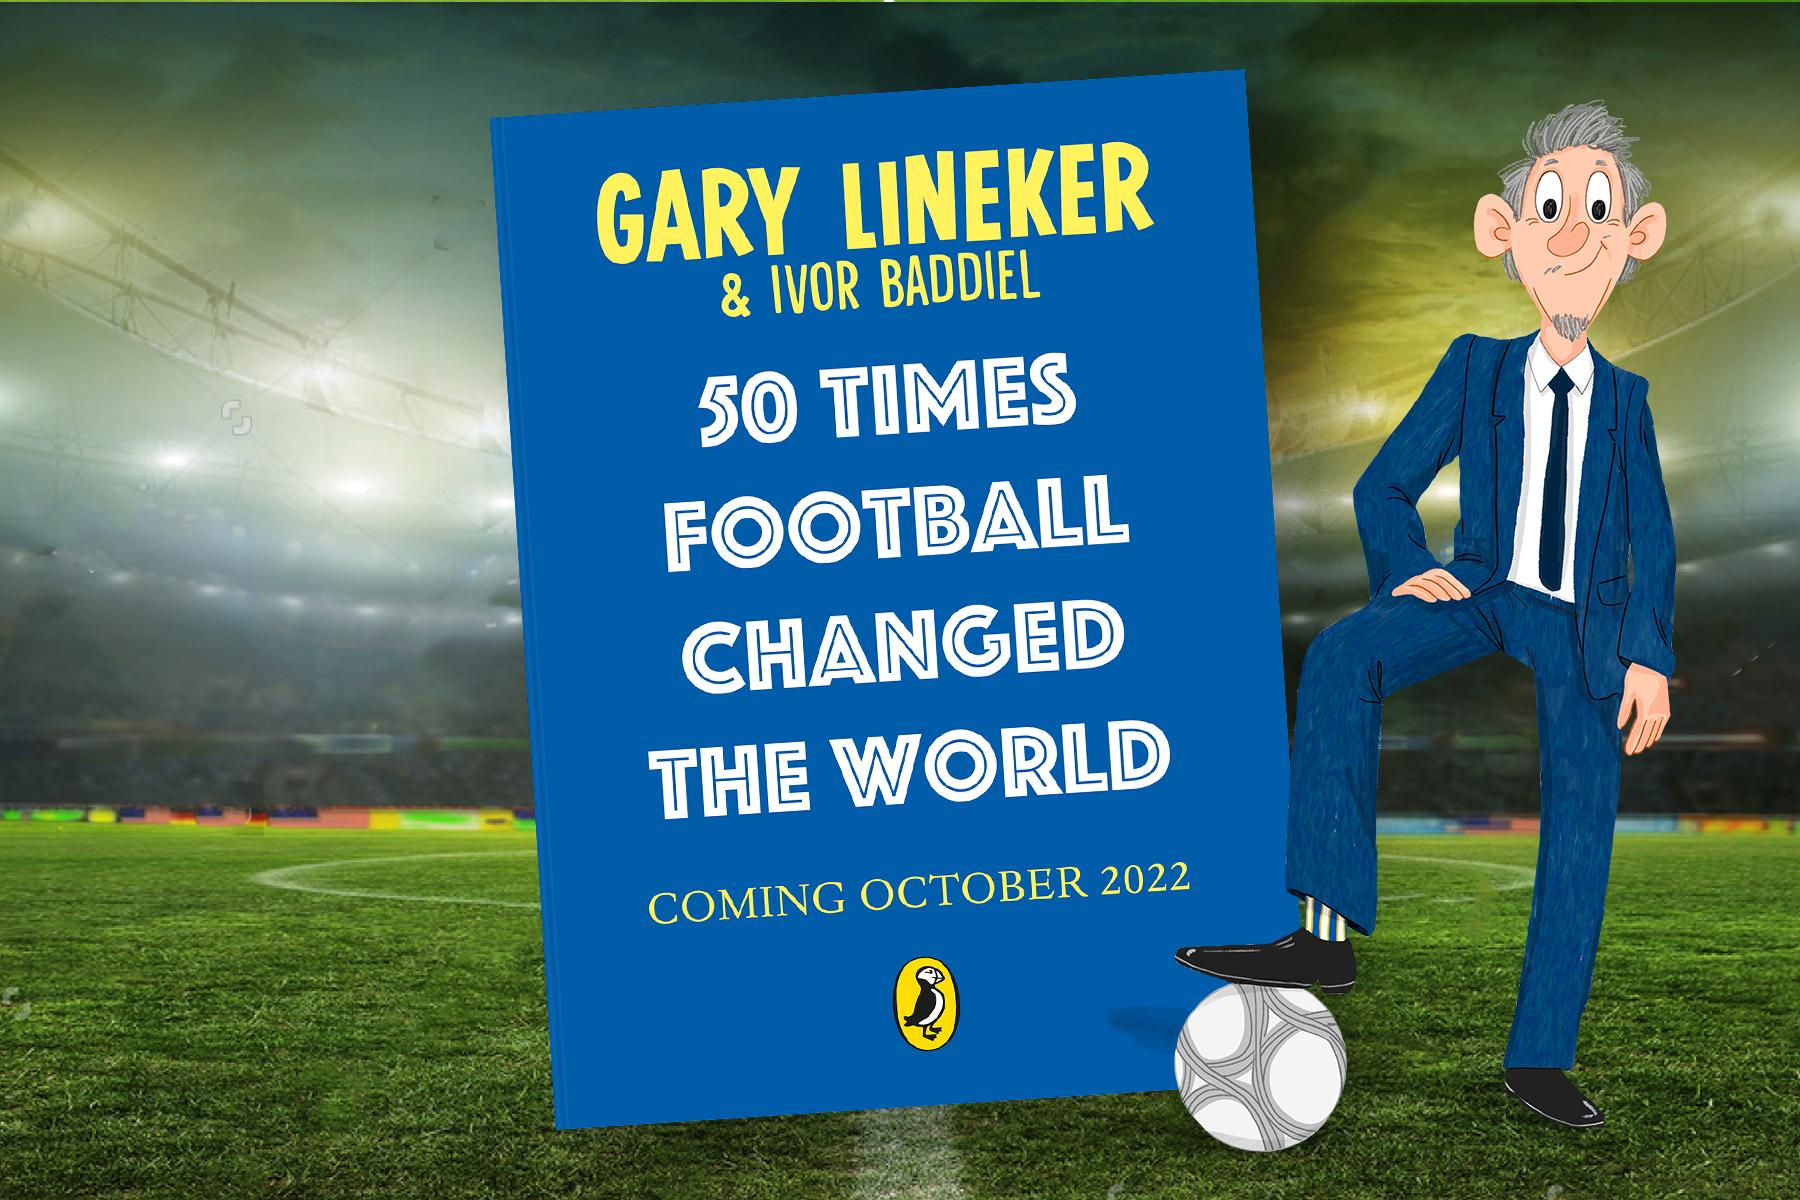 An image of the placeholder cover of Gary Lineker's new kids book 50 Times Football Changed the World. It is a dark blue cover with the title in yellow and white writing. Next to it is an illustration of the Gary Lineker propping his right leg up onto a football. The background is a football pitch.